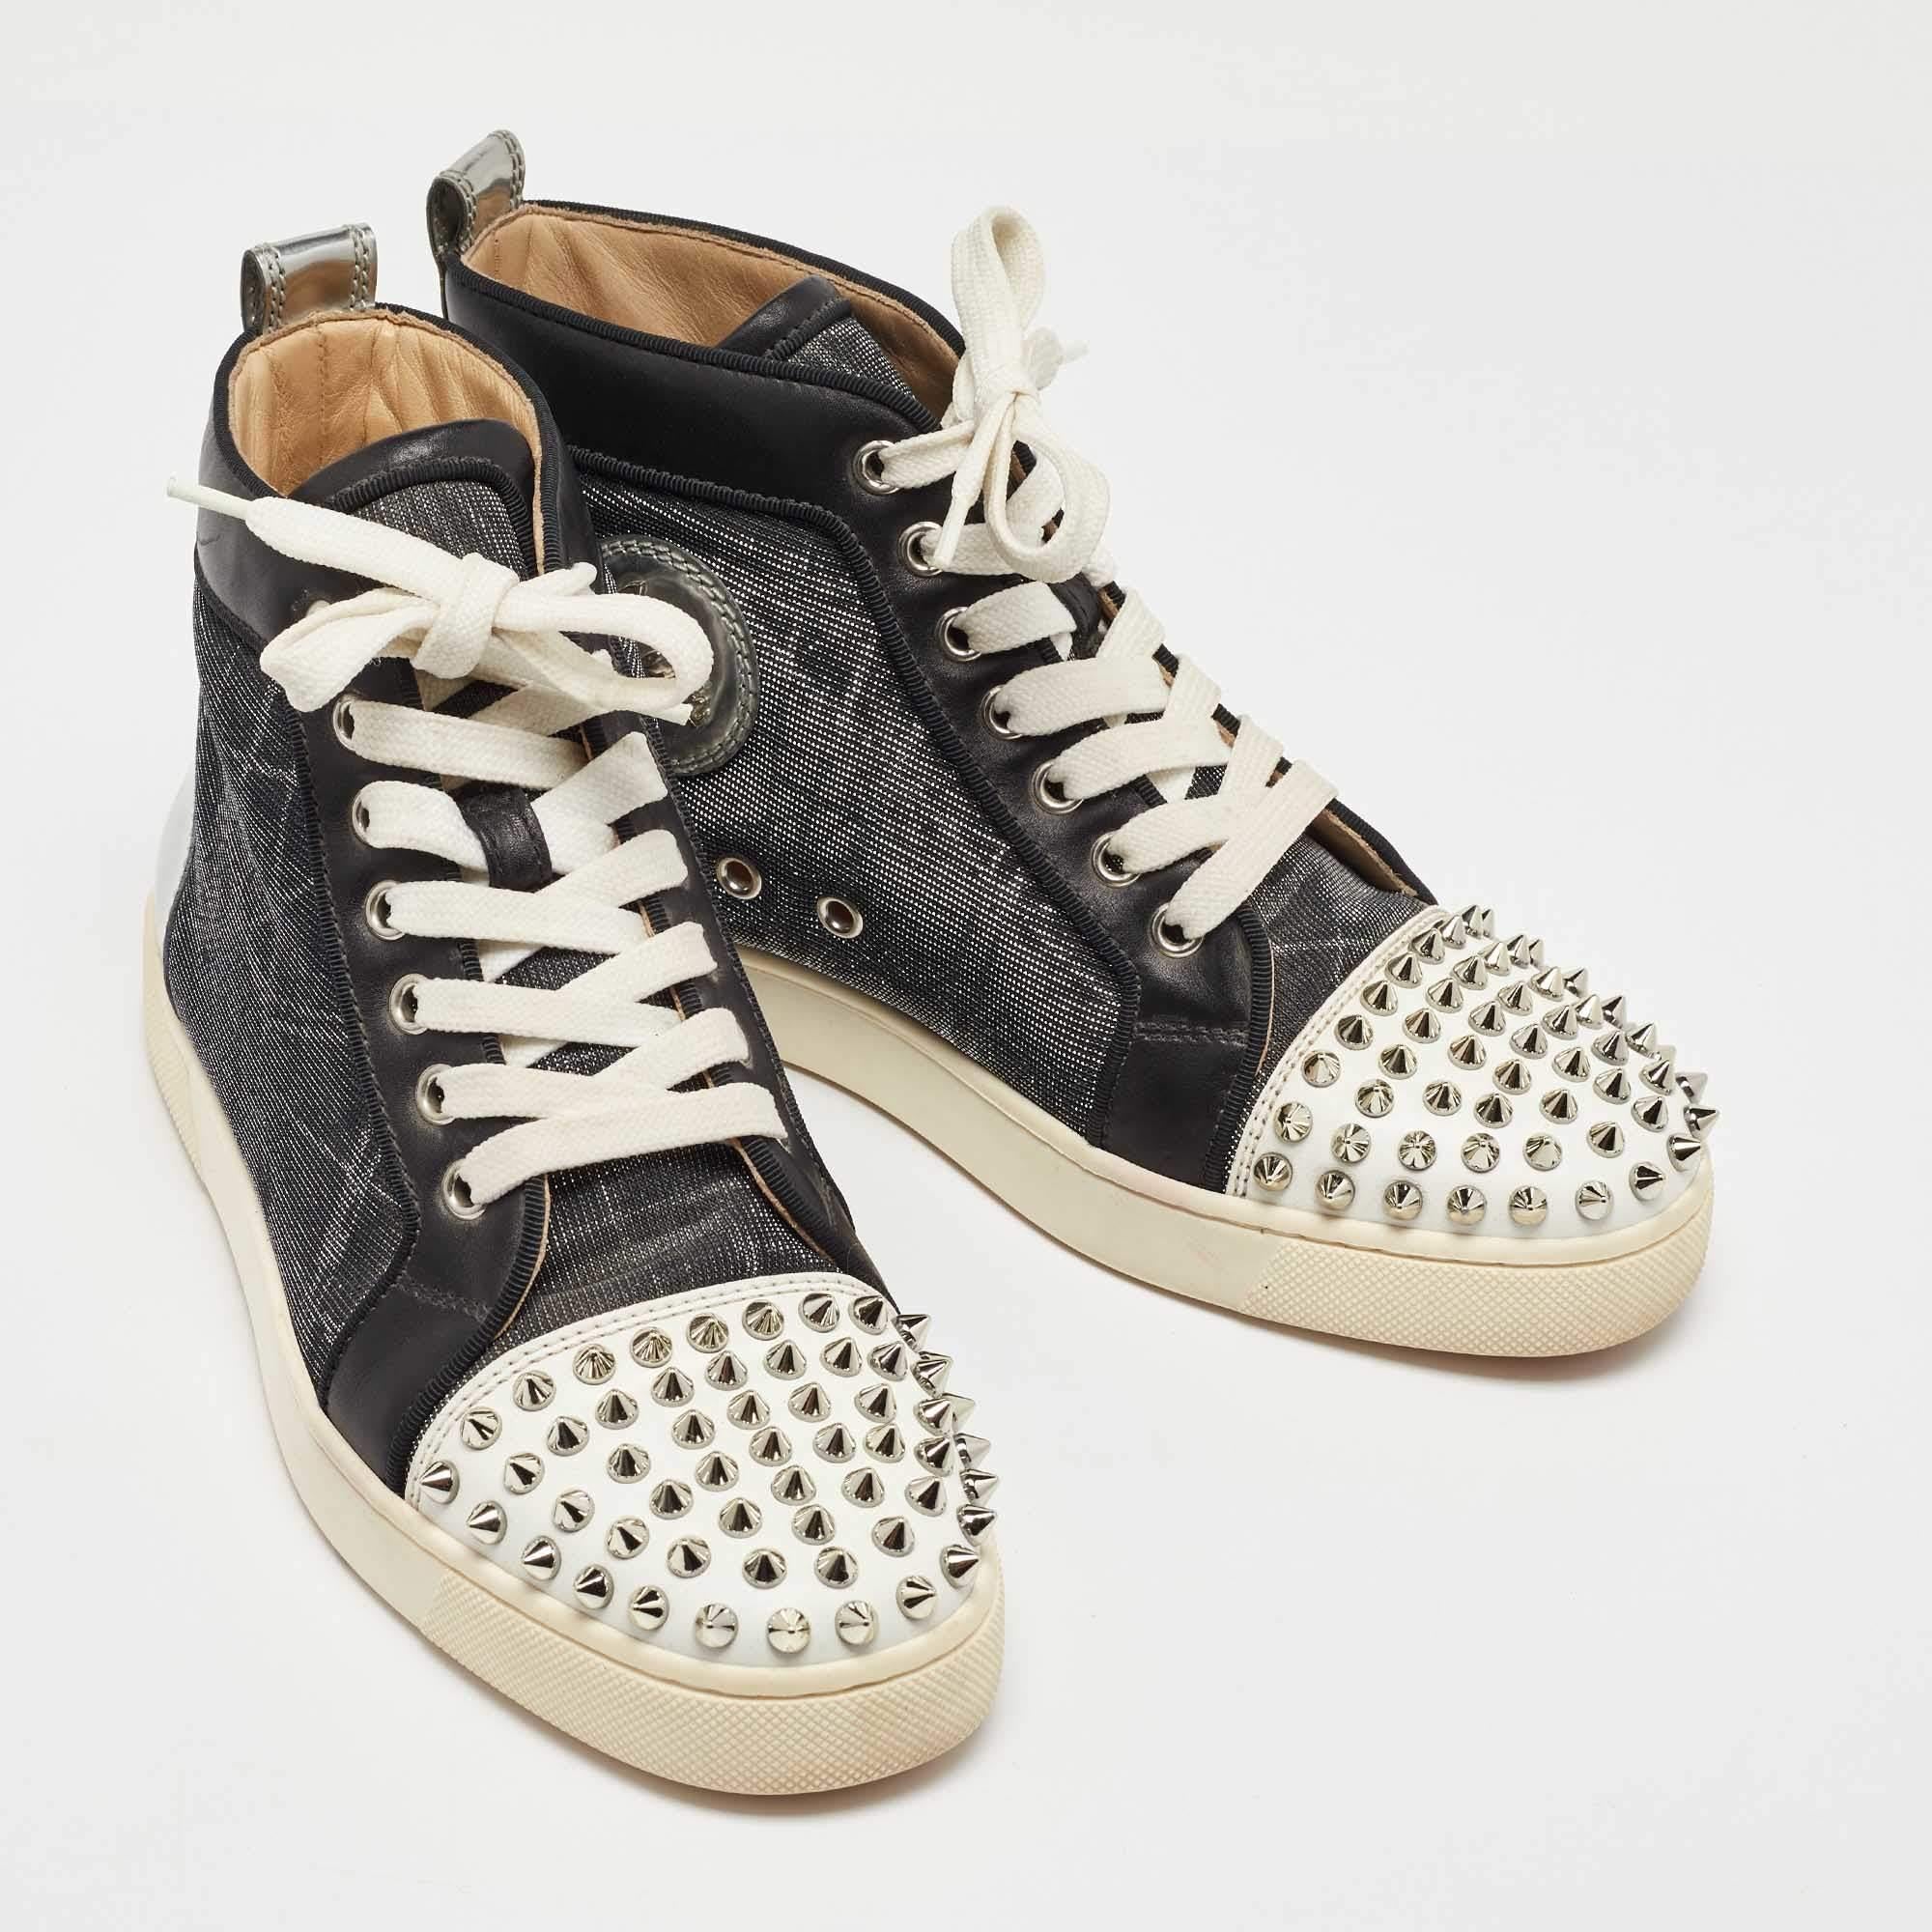 Christian Louboutin Leather and Mesh Louis Spikes Orlato Sneakers Size 37.5 In Fair Condition For Sale In Dubai, Al Qouz 2